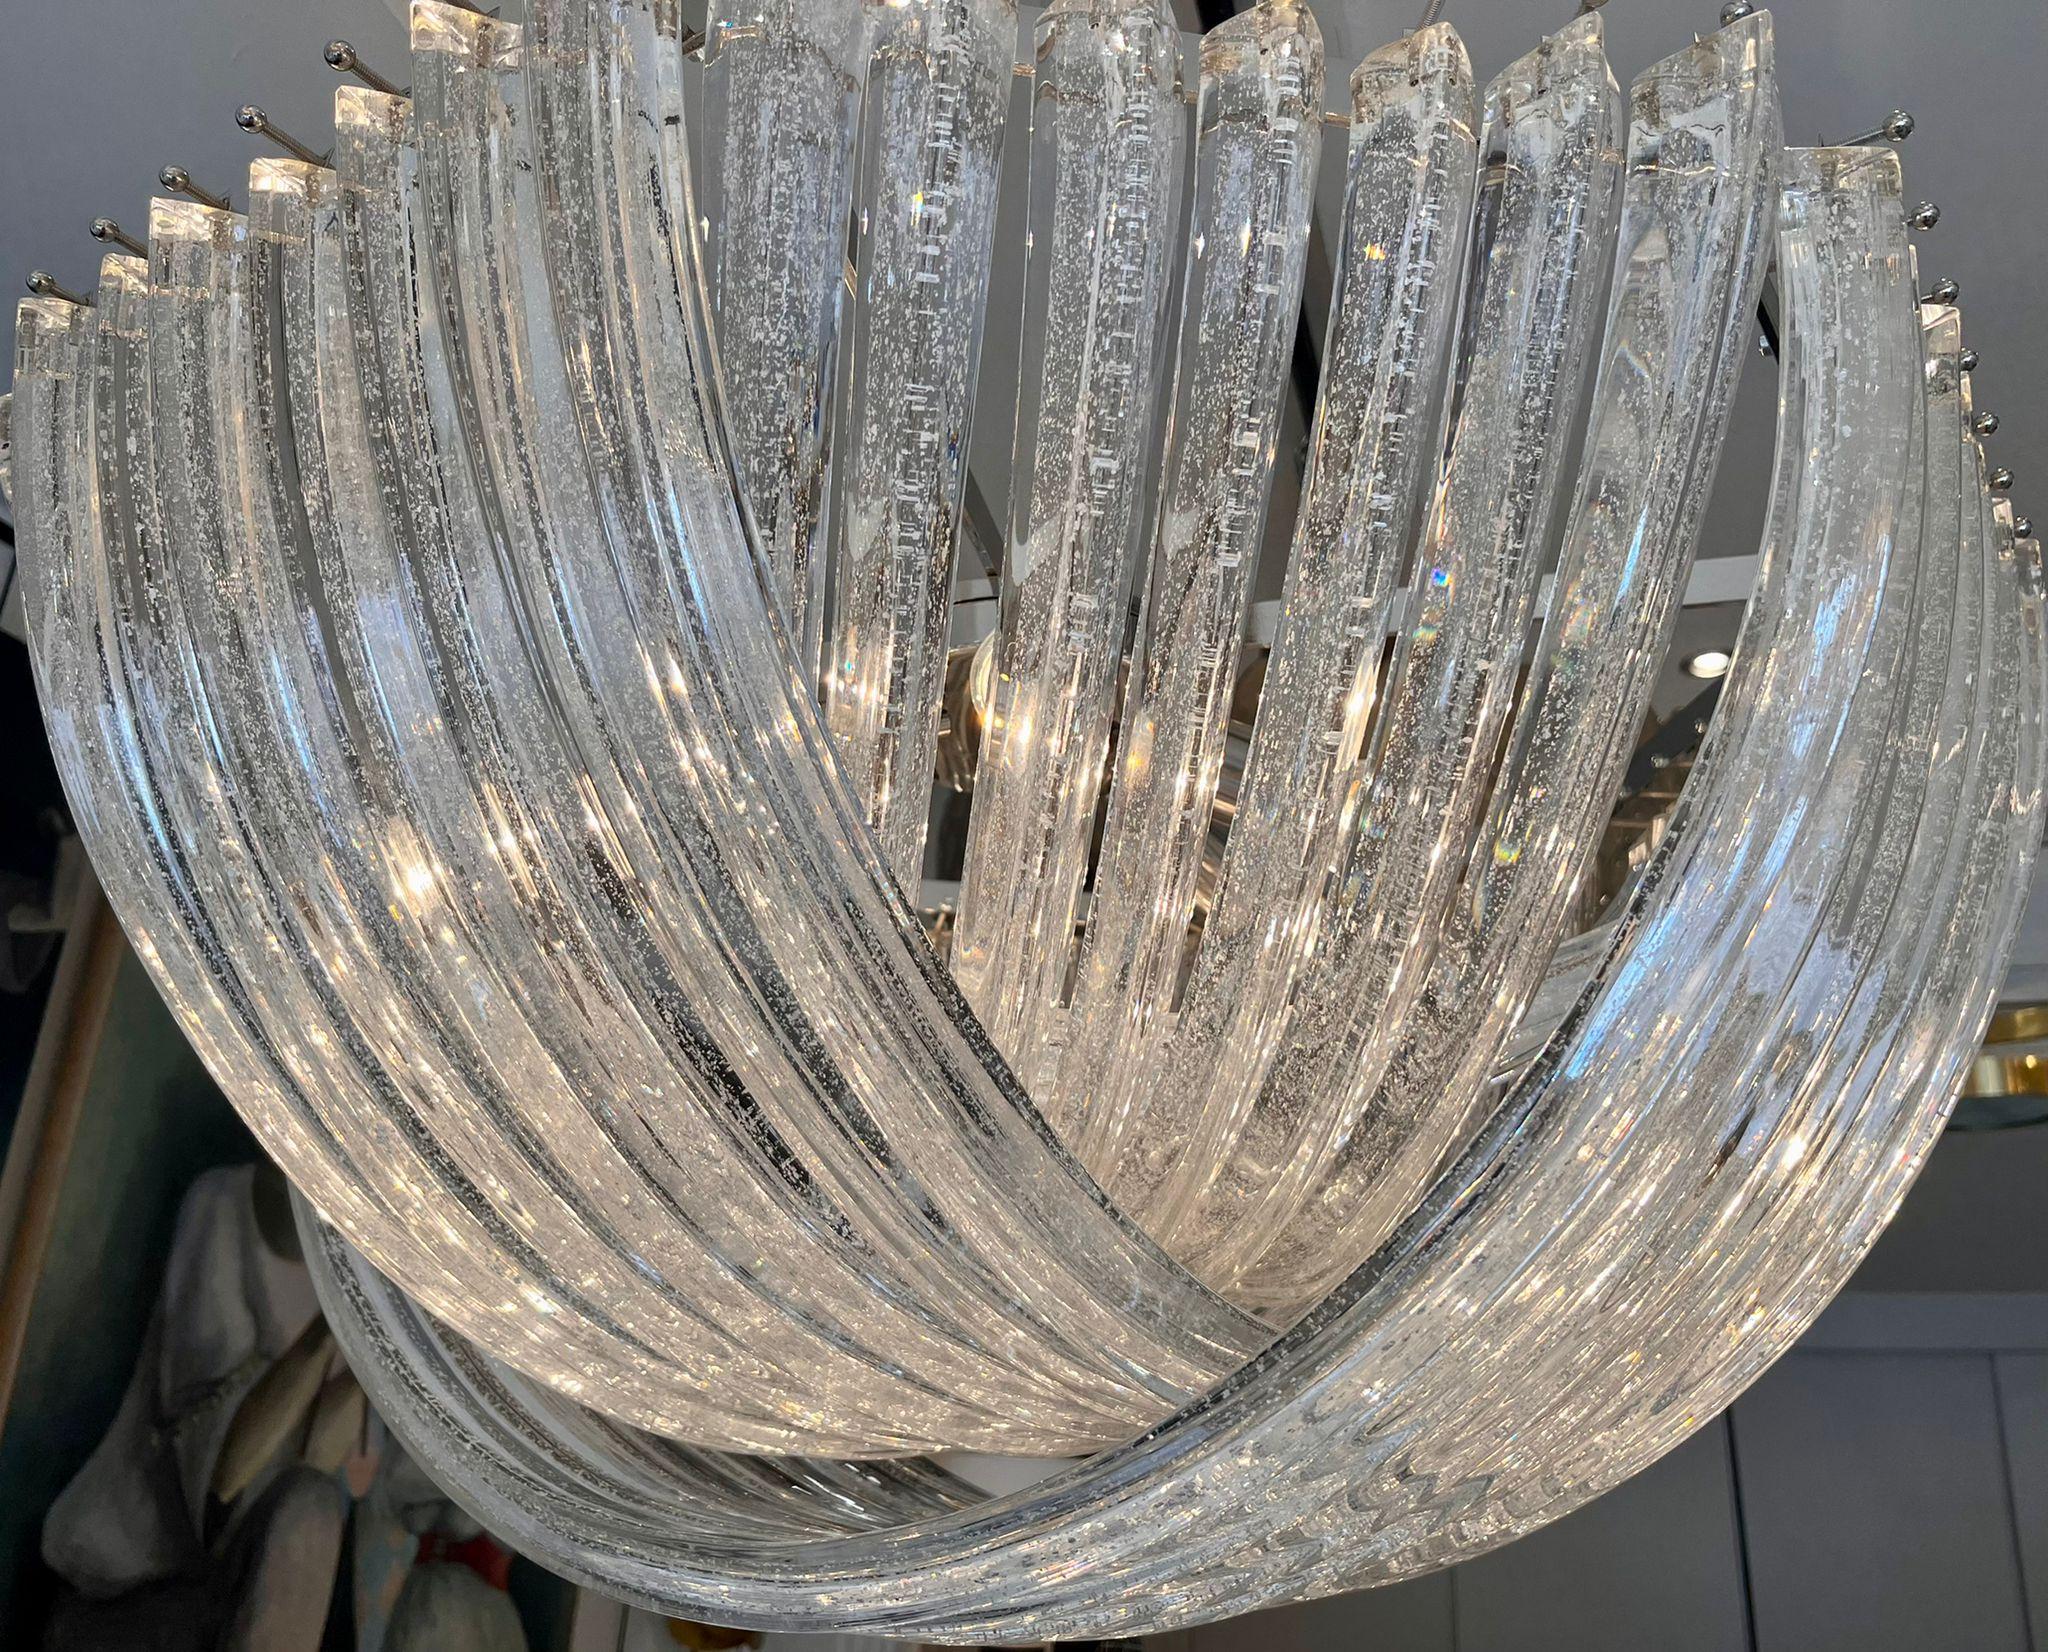 Murano handblown sparling(silver glitters) clear crystal glass chandelier.

Fixture in plated chrome.
Measures: Diameter 80 cm
Six E27/E26 bulbs ( wired for Europe or USA)
Measures: Height (40 cm) is only for the basket.
Total H 120cm can be reduced